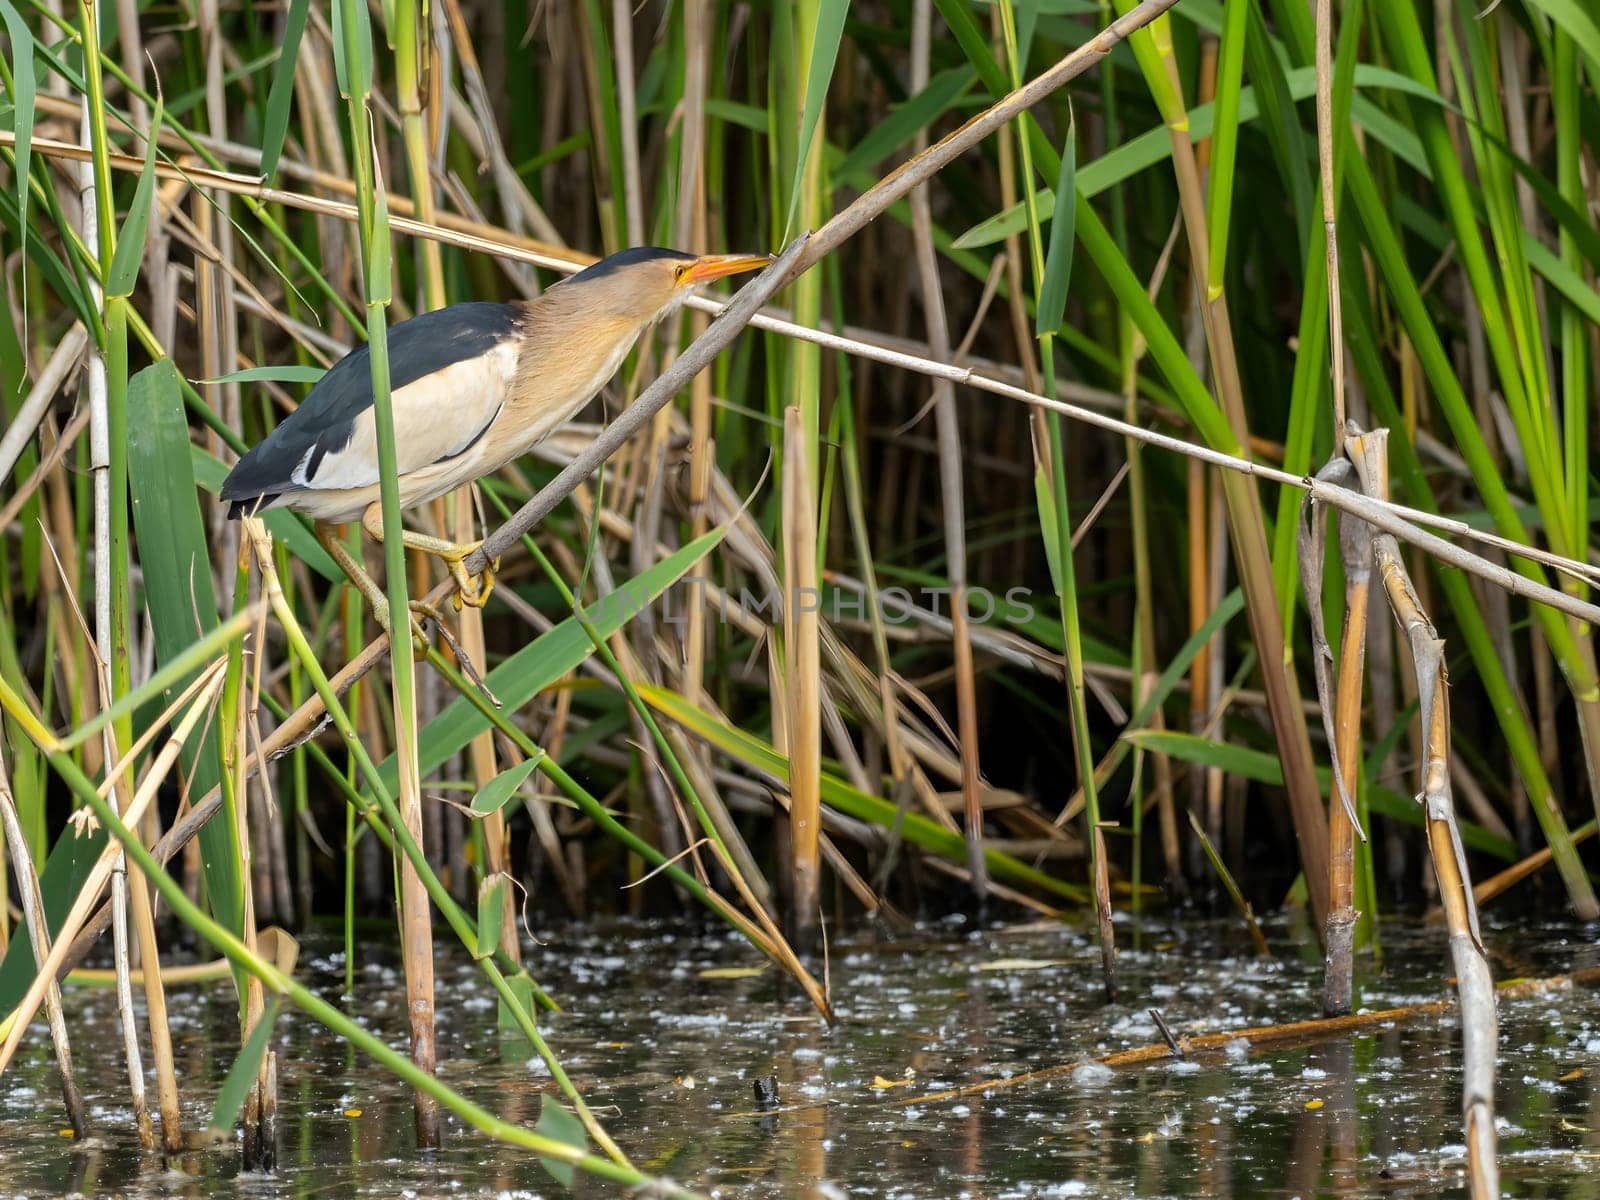 Little Bittern perched on a reed stem near the water, blending seamlessly with the surrounding greenery, showcasing its natural camouflage